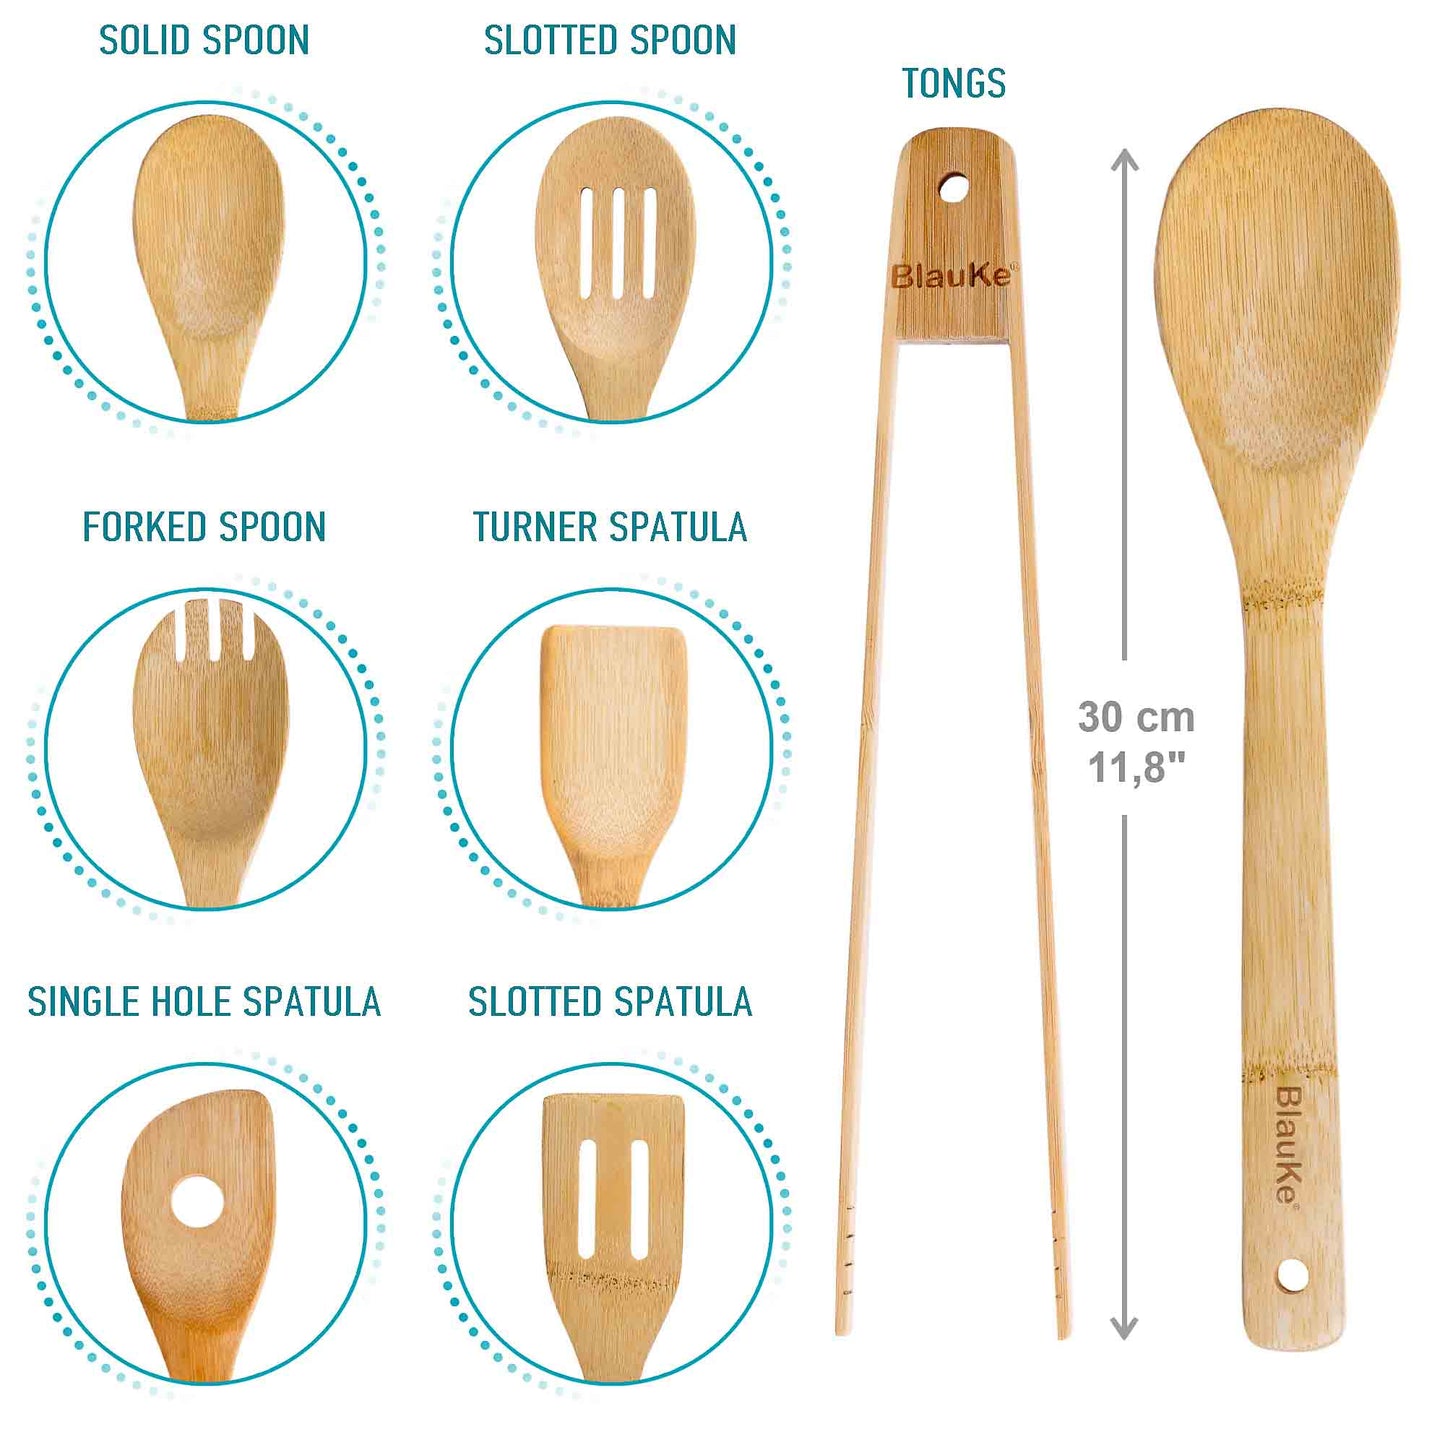 Wooden Spoons for Cooking 7-Pack - Bamboo Kitchen Utensils Set for Nonstick Cookware-2